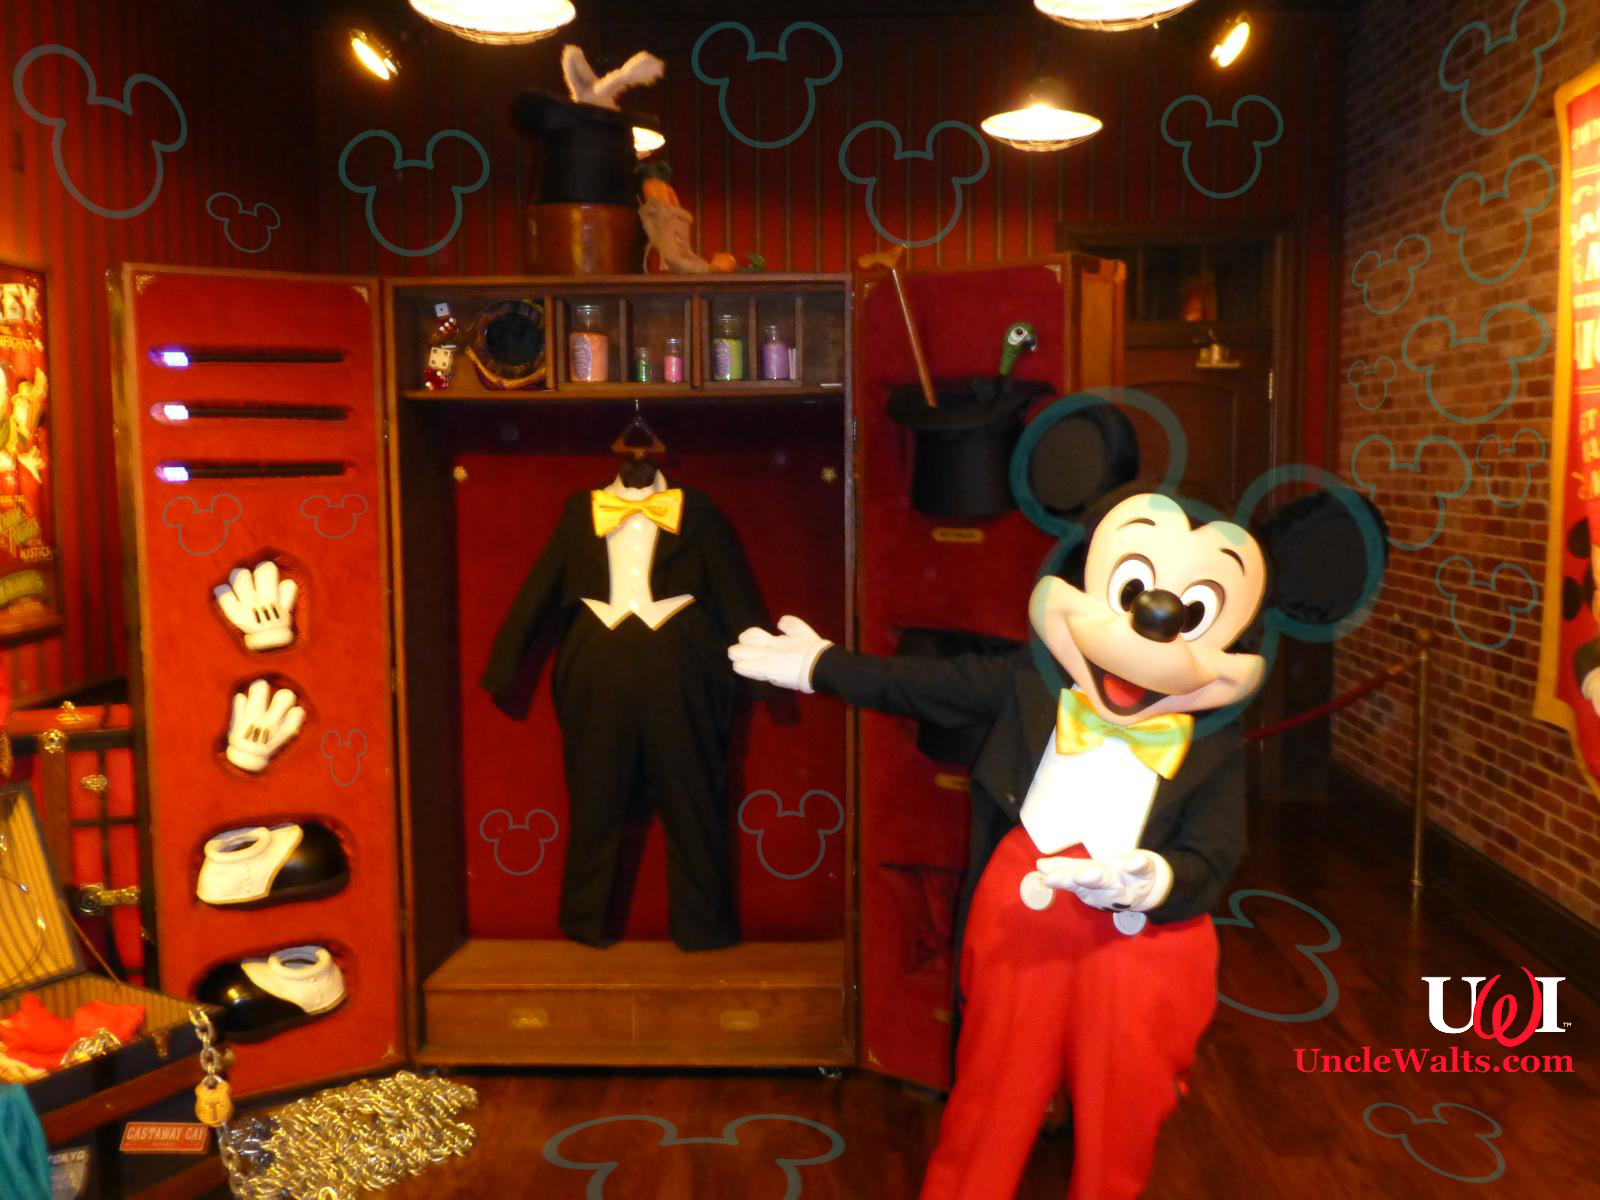 Can you find the one Hidden Mickey? Original empty room photo by JeffChristiansen [CC BY 2.0] via Flickr.